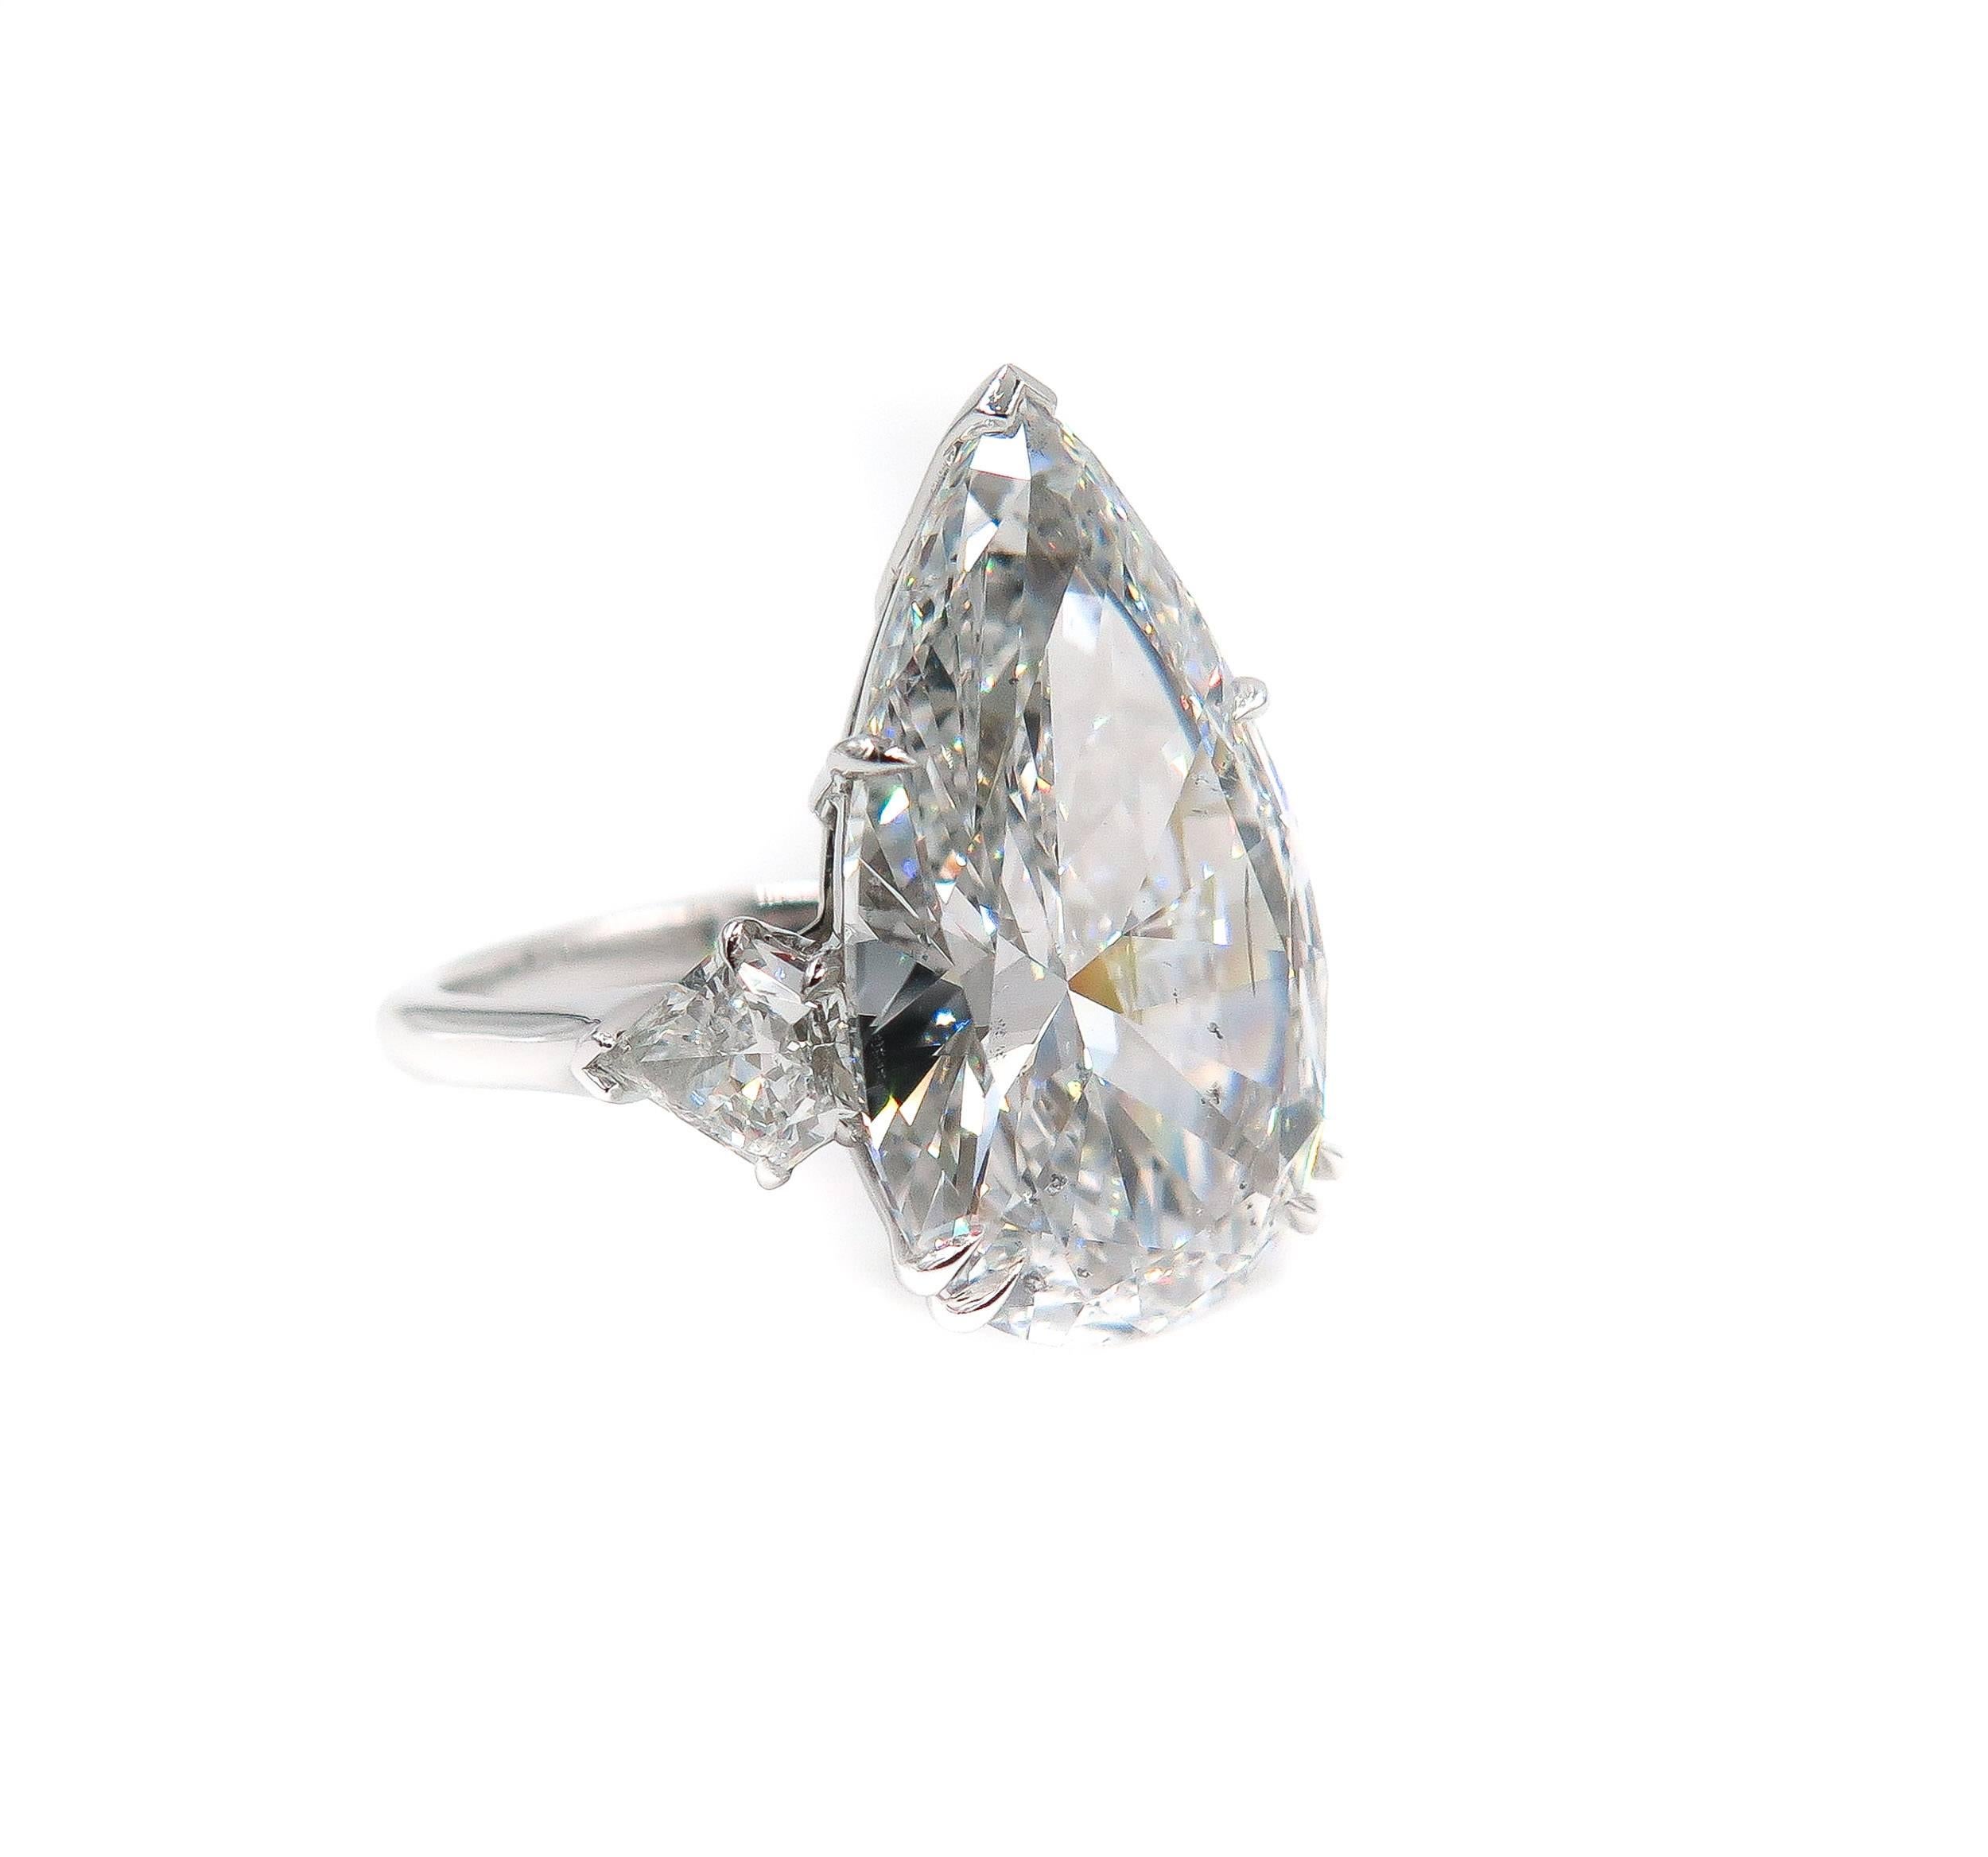 An exquisite pear shaped diamond engagement ring, handcrafted in platinum. 
The incredible beauty of this diamond will mesmerize any and all who get caught by its brilliance. Certified by GIA, the 10.07 carats is a D color, SI2 clarity.
Finger size